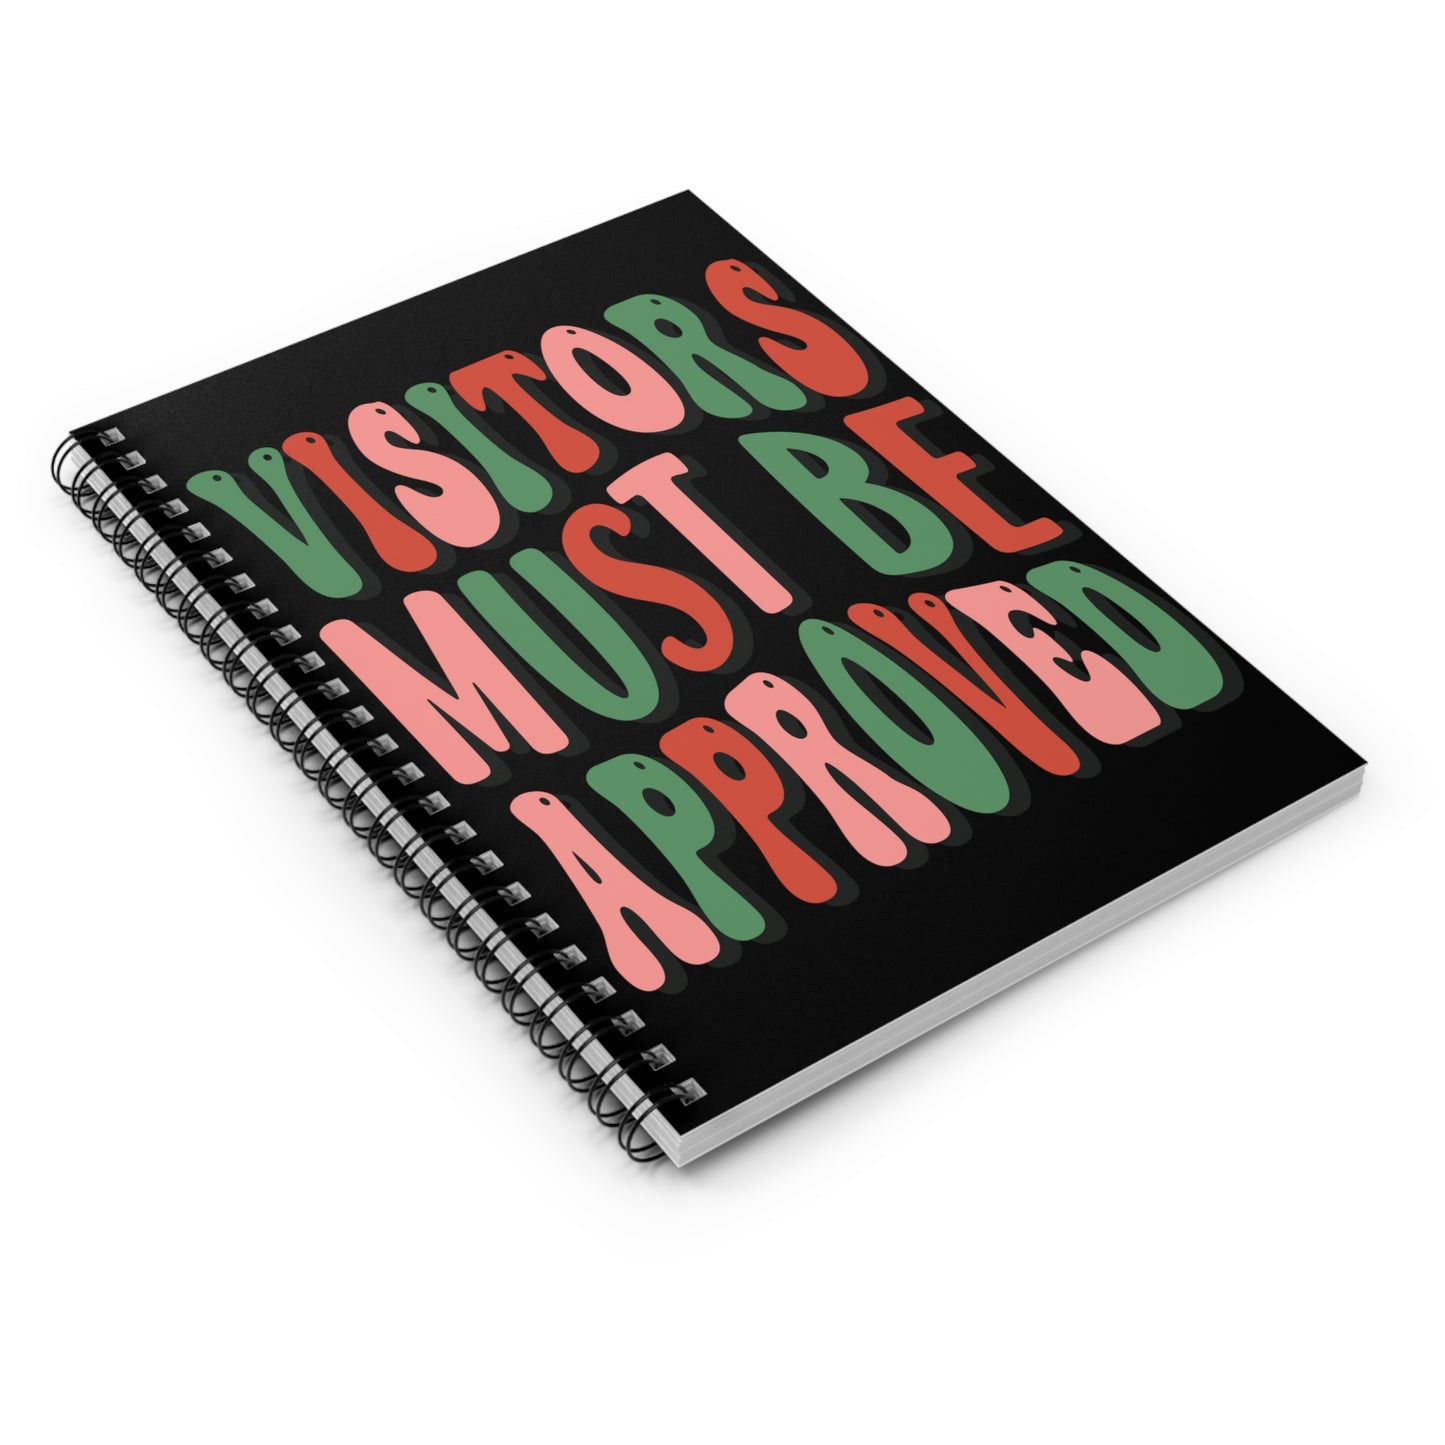 Visitors Must Be Approved: Spiral Notebook - Log Books - Journals - Diaries - and More Custom Printed by TheGlassyLass.com